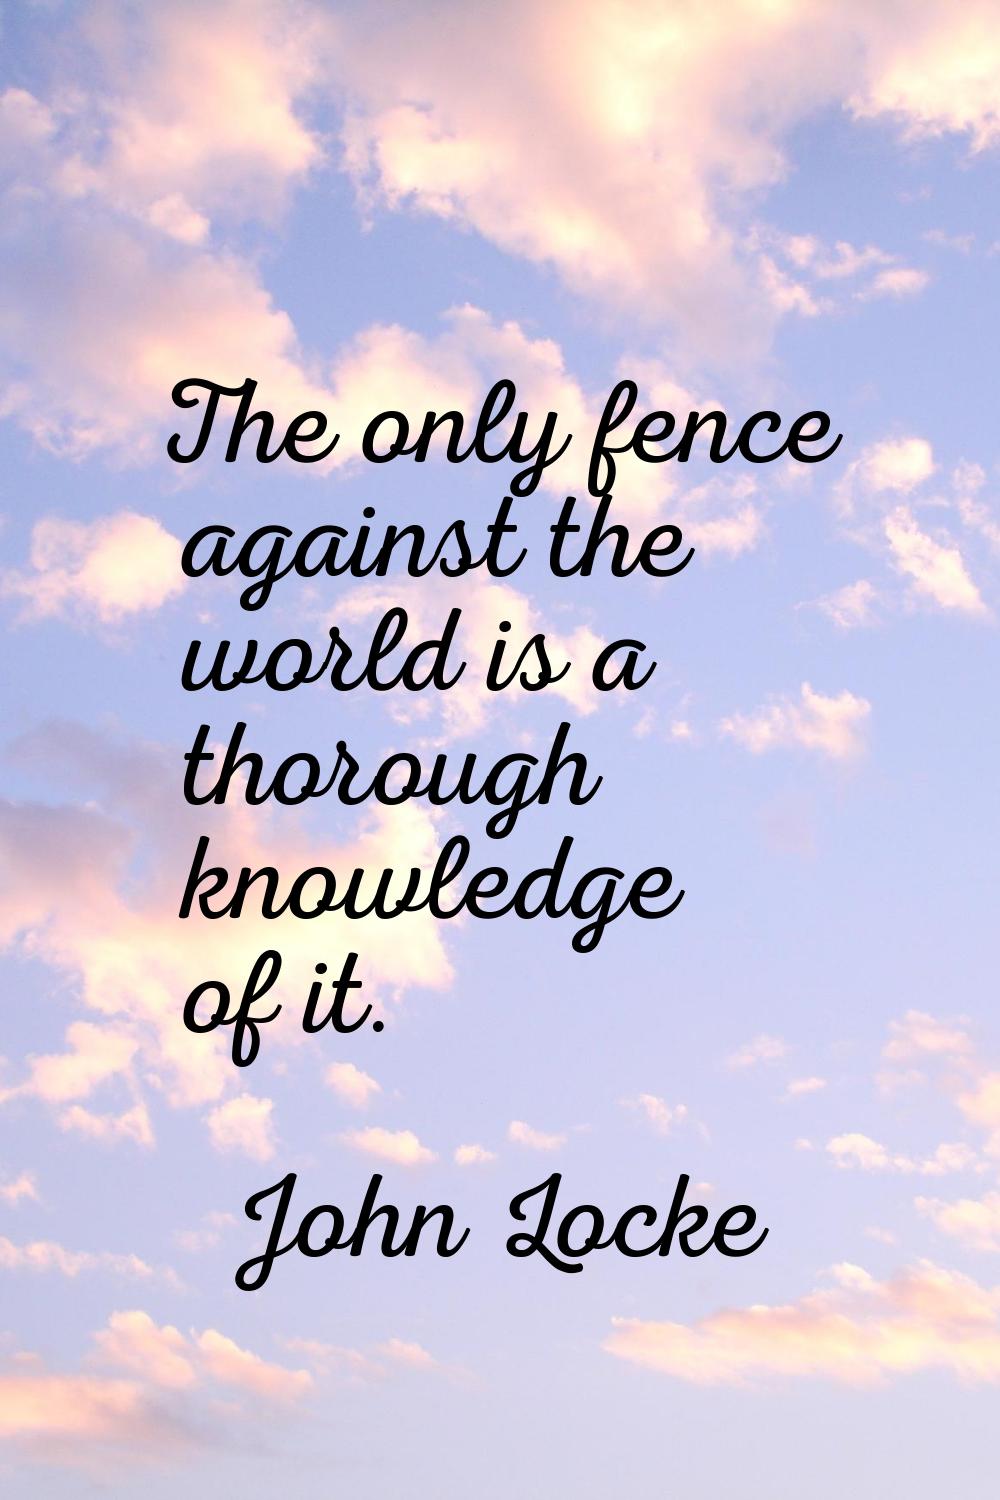 The only fence against the world is a thorough knowledge of it.